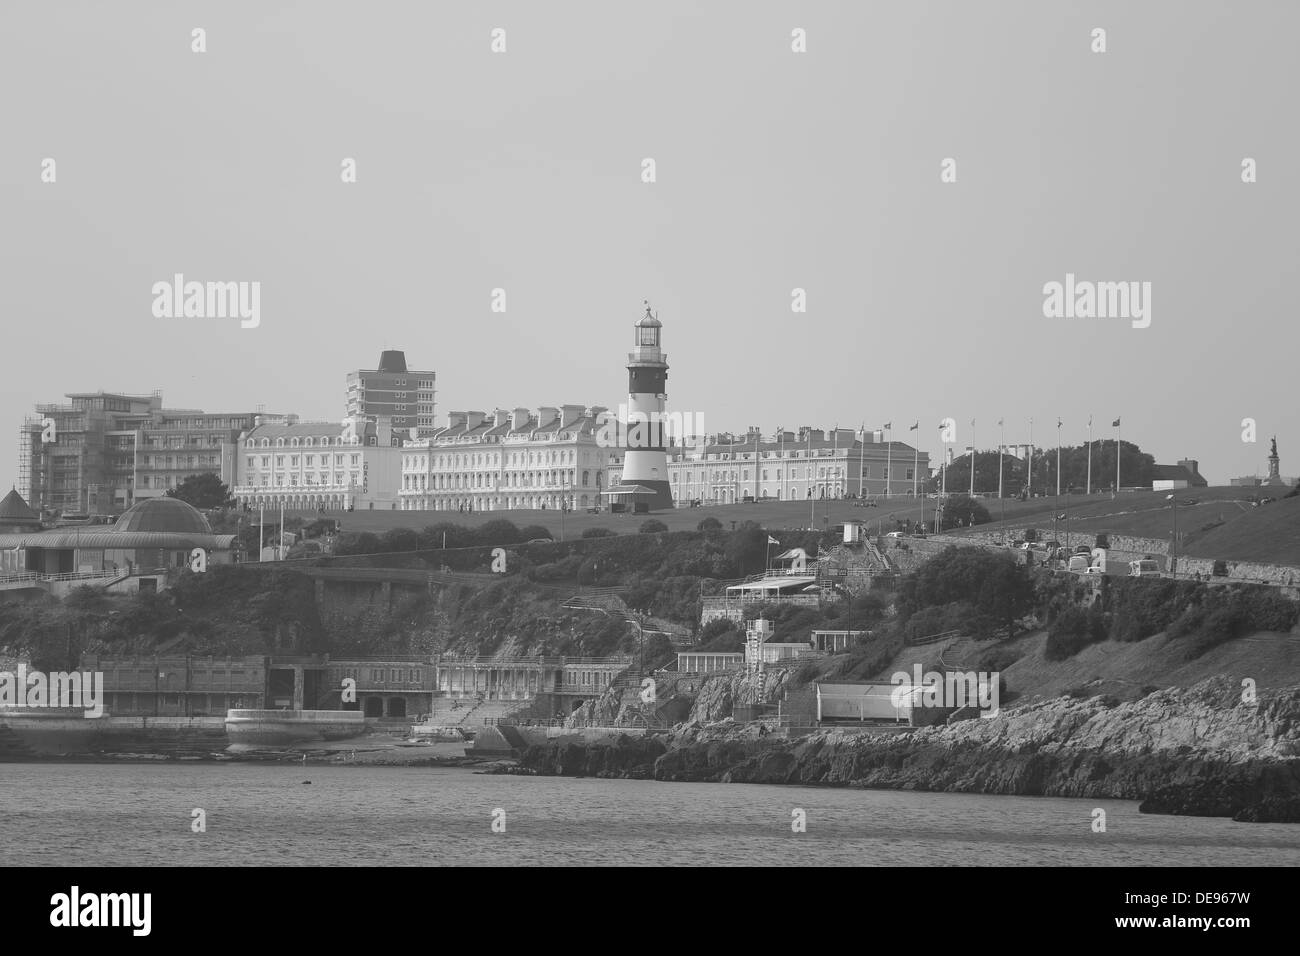 Smeaton'S TOWER Lighthouse Plymouth Hoe plymouth Devon Uk Banque D'Images